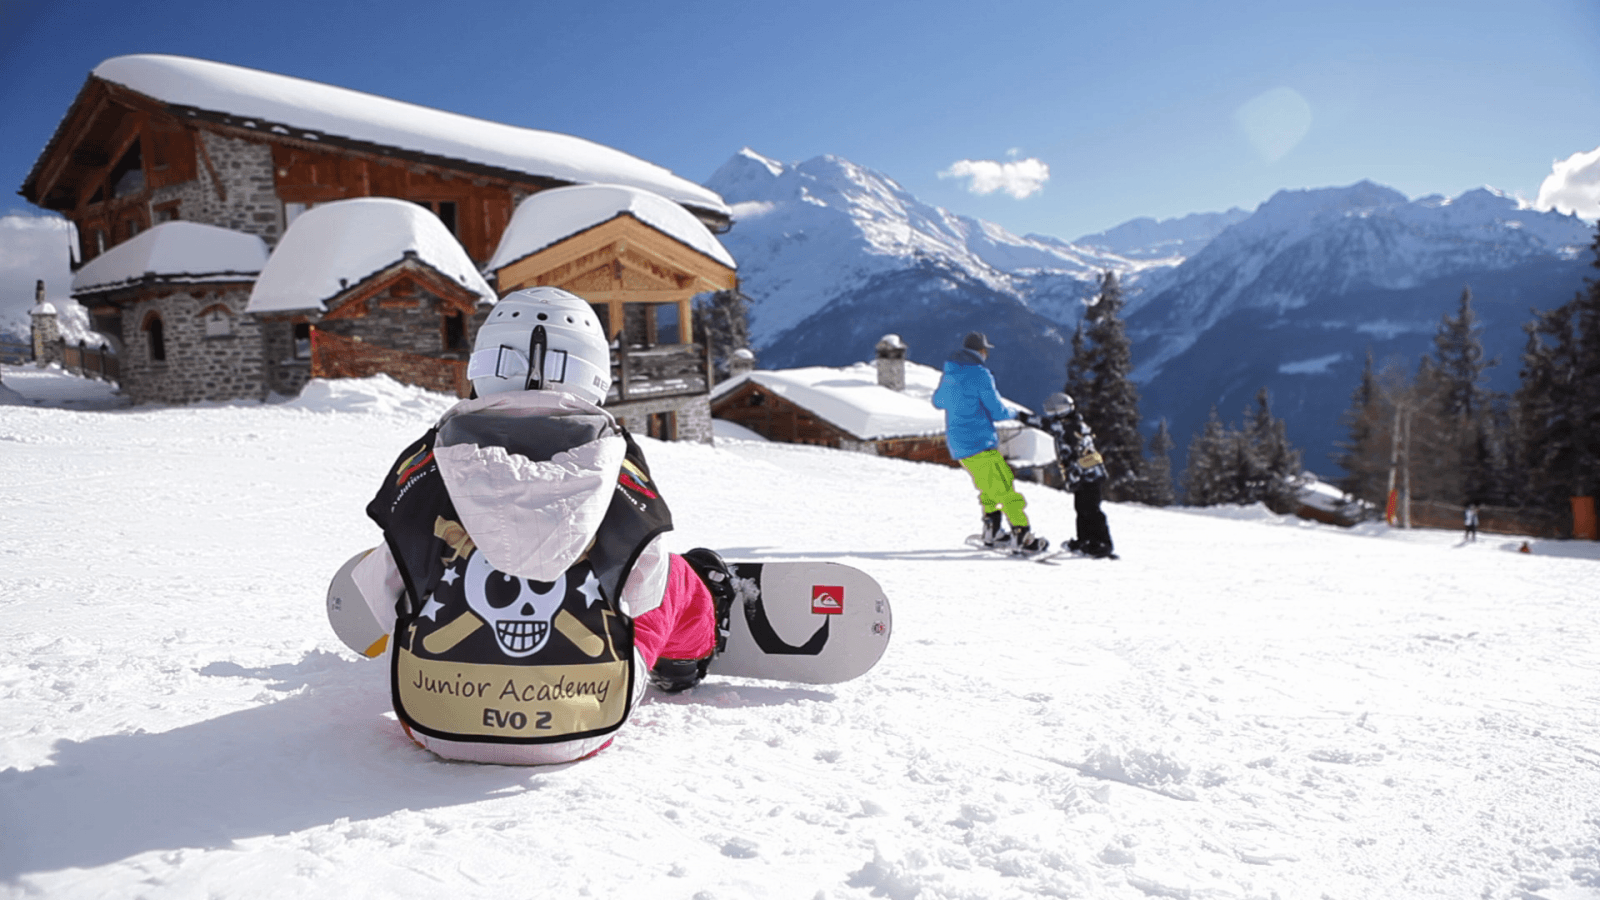 Learn how to snowboard in La Rosière. The resort’s cross-border ski area boasts breath-taking views of the French and Italian peaks. Our instructors are on hand to help you improve your snowboarding skills.